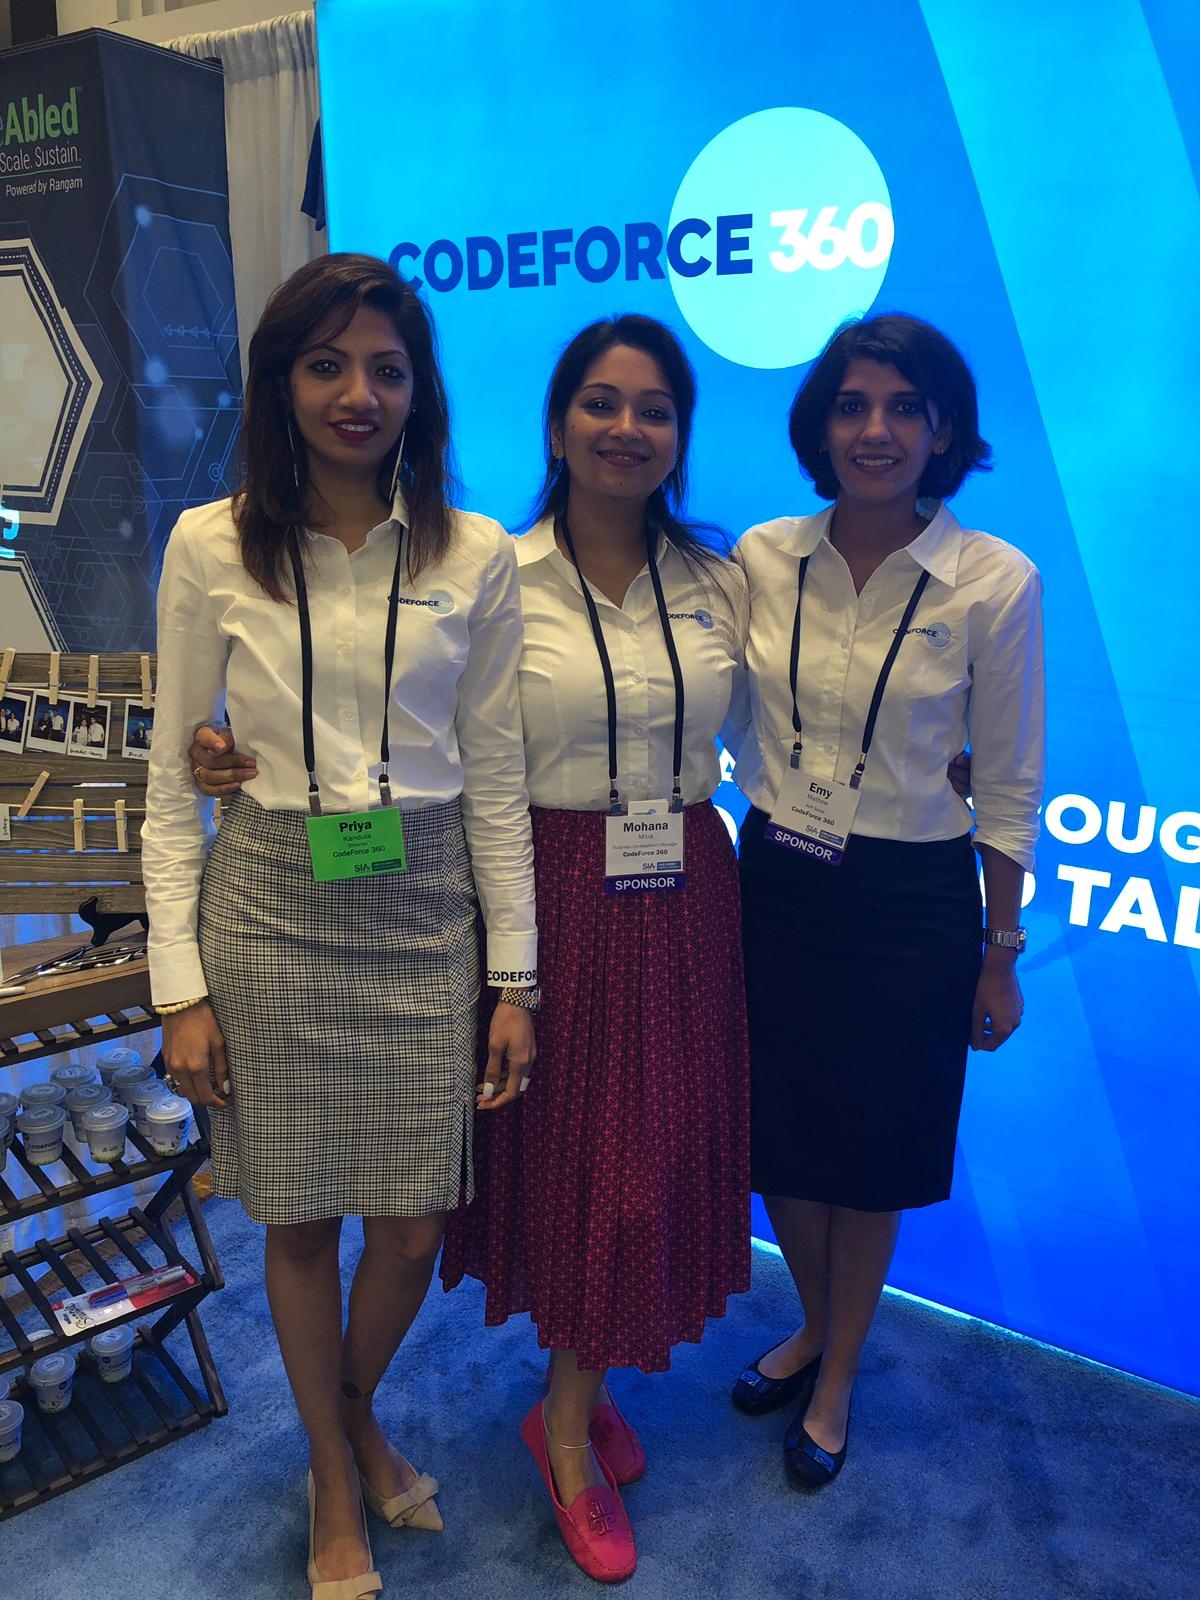 CodeForce conference